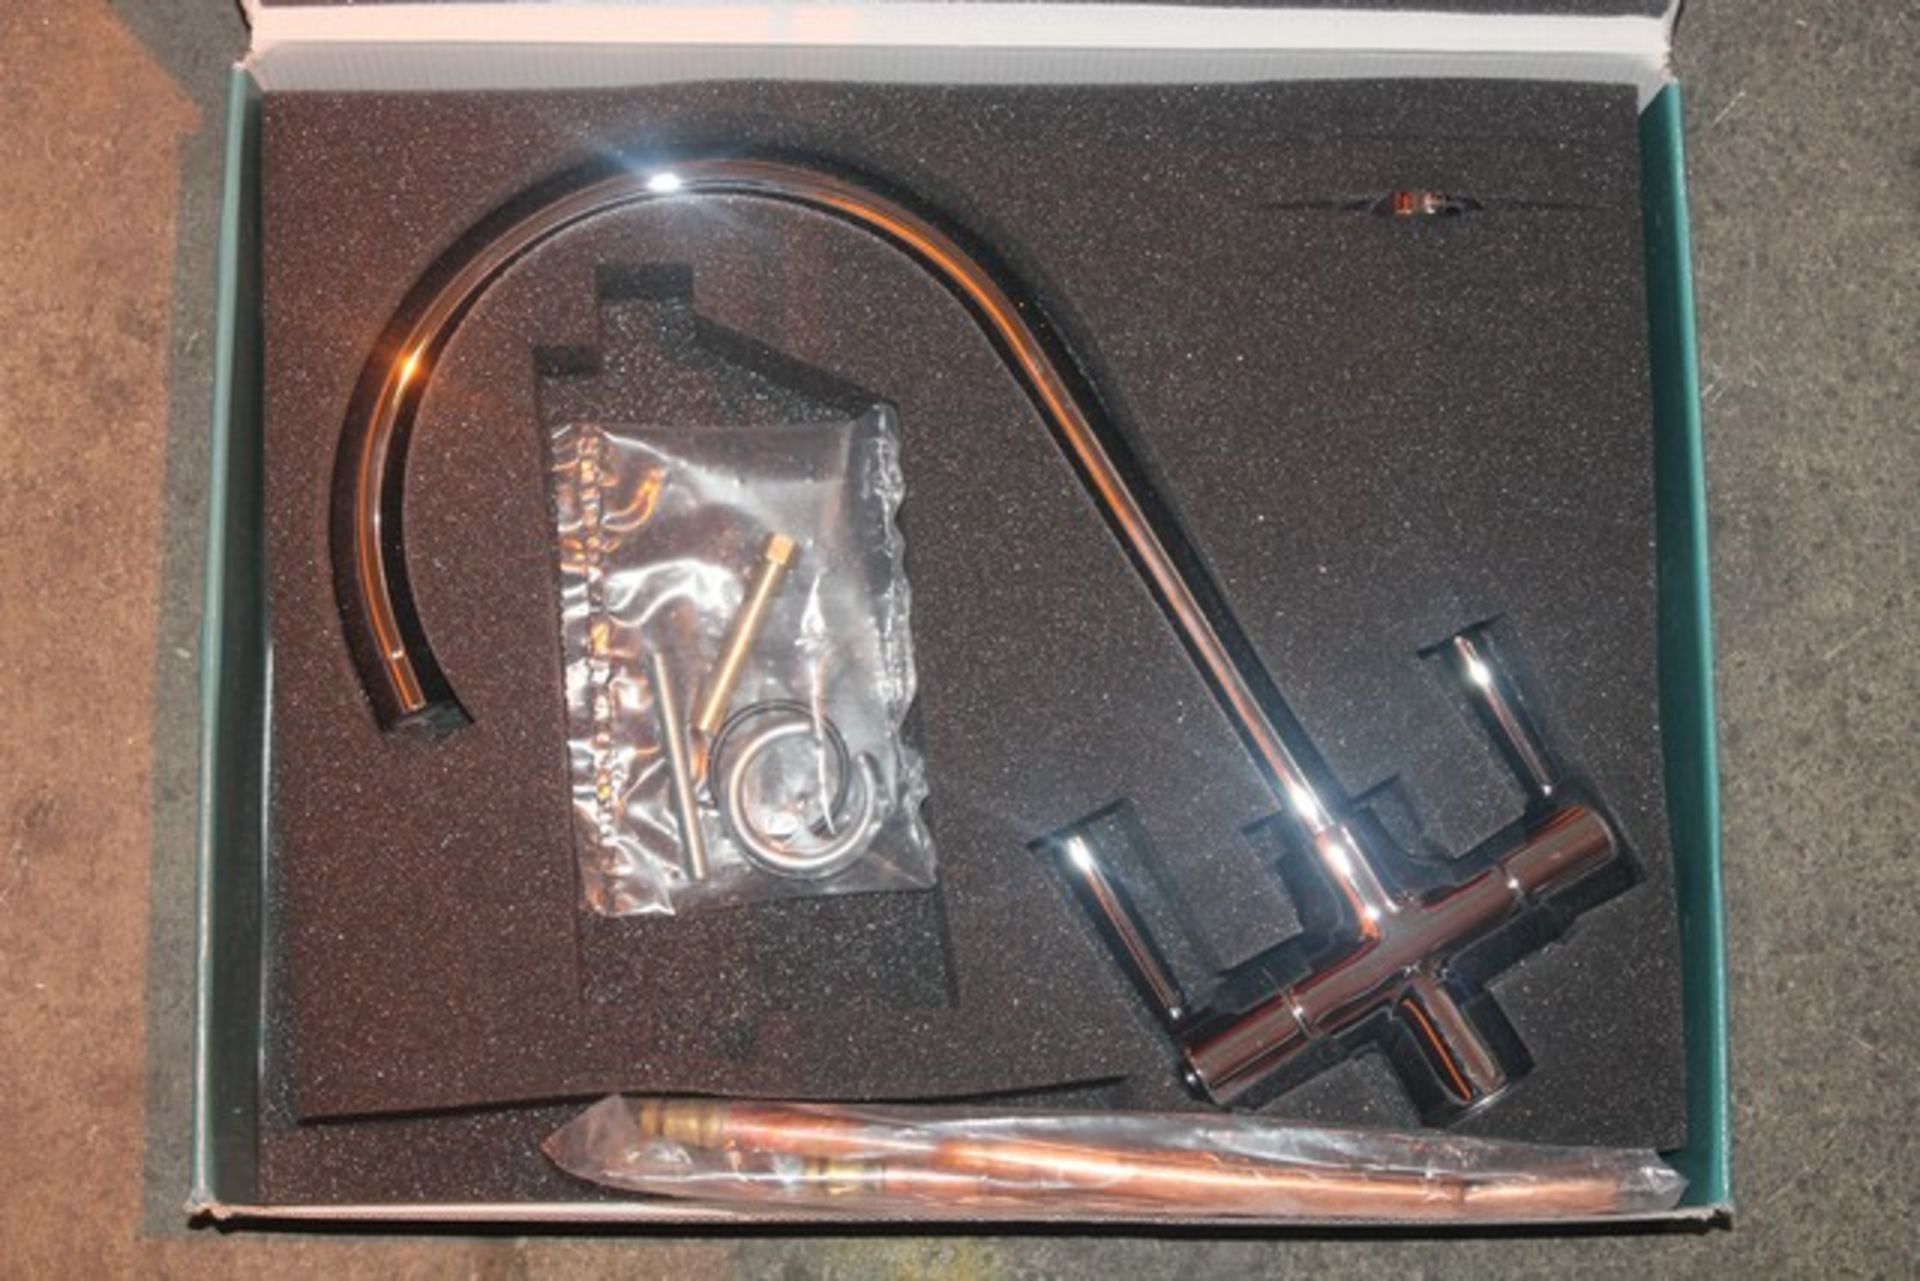 1 x BOXED CURVE QUARTER TURN MIXER TAP SET   *PLEASE NOTE THAT THE BID PRICE IS MULTIPLIED BY THE